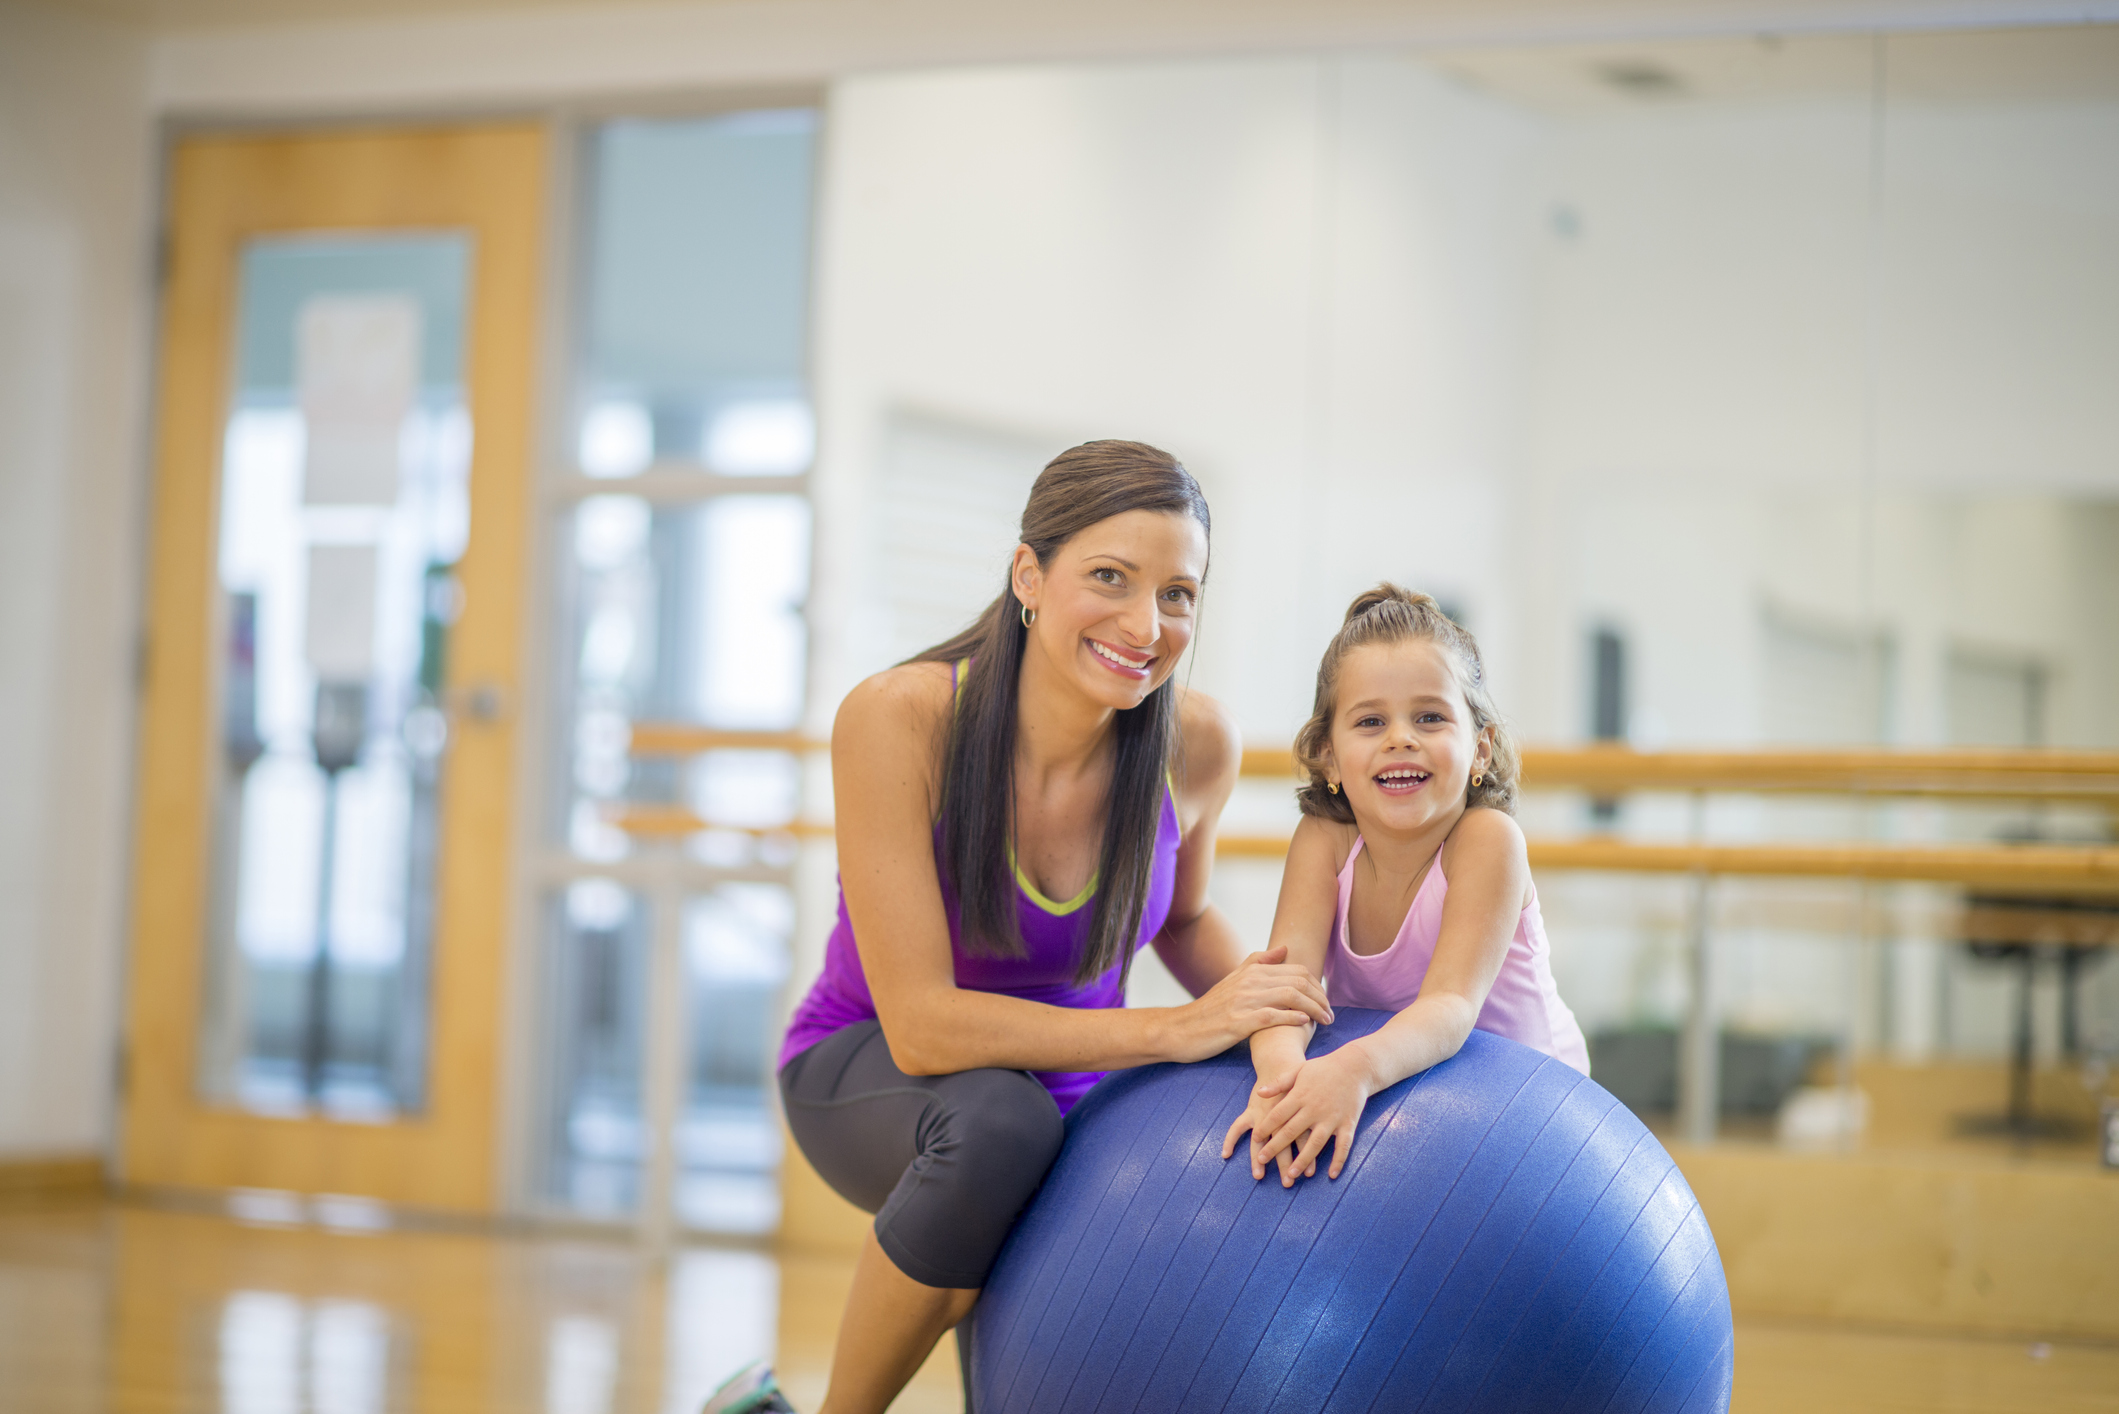 A mother and daughter are wearing athletic clothing and are happily together at the gym. They are smiling and looking at the camera.